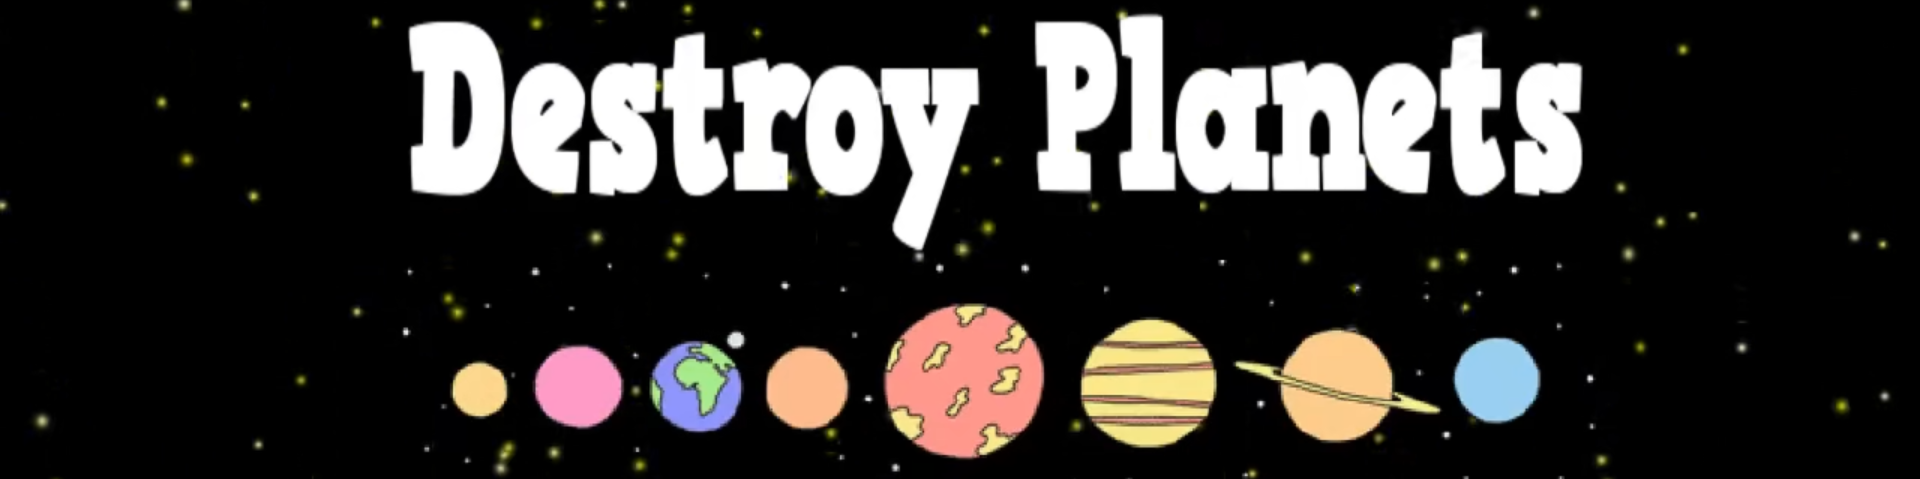 Destroy Planets